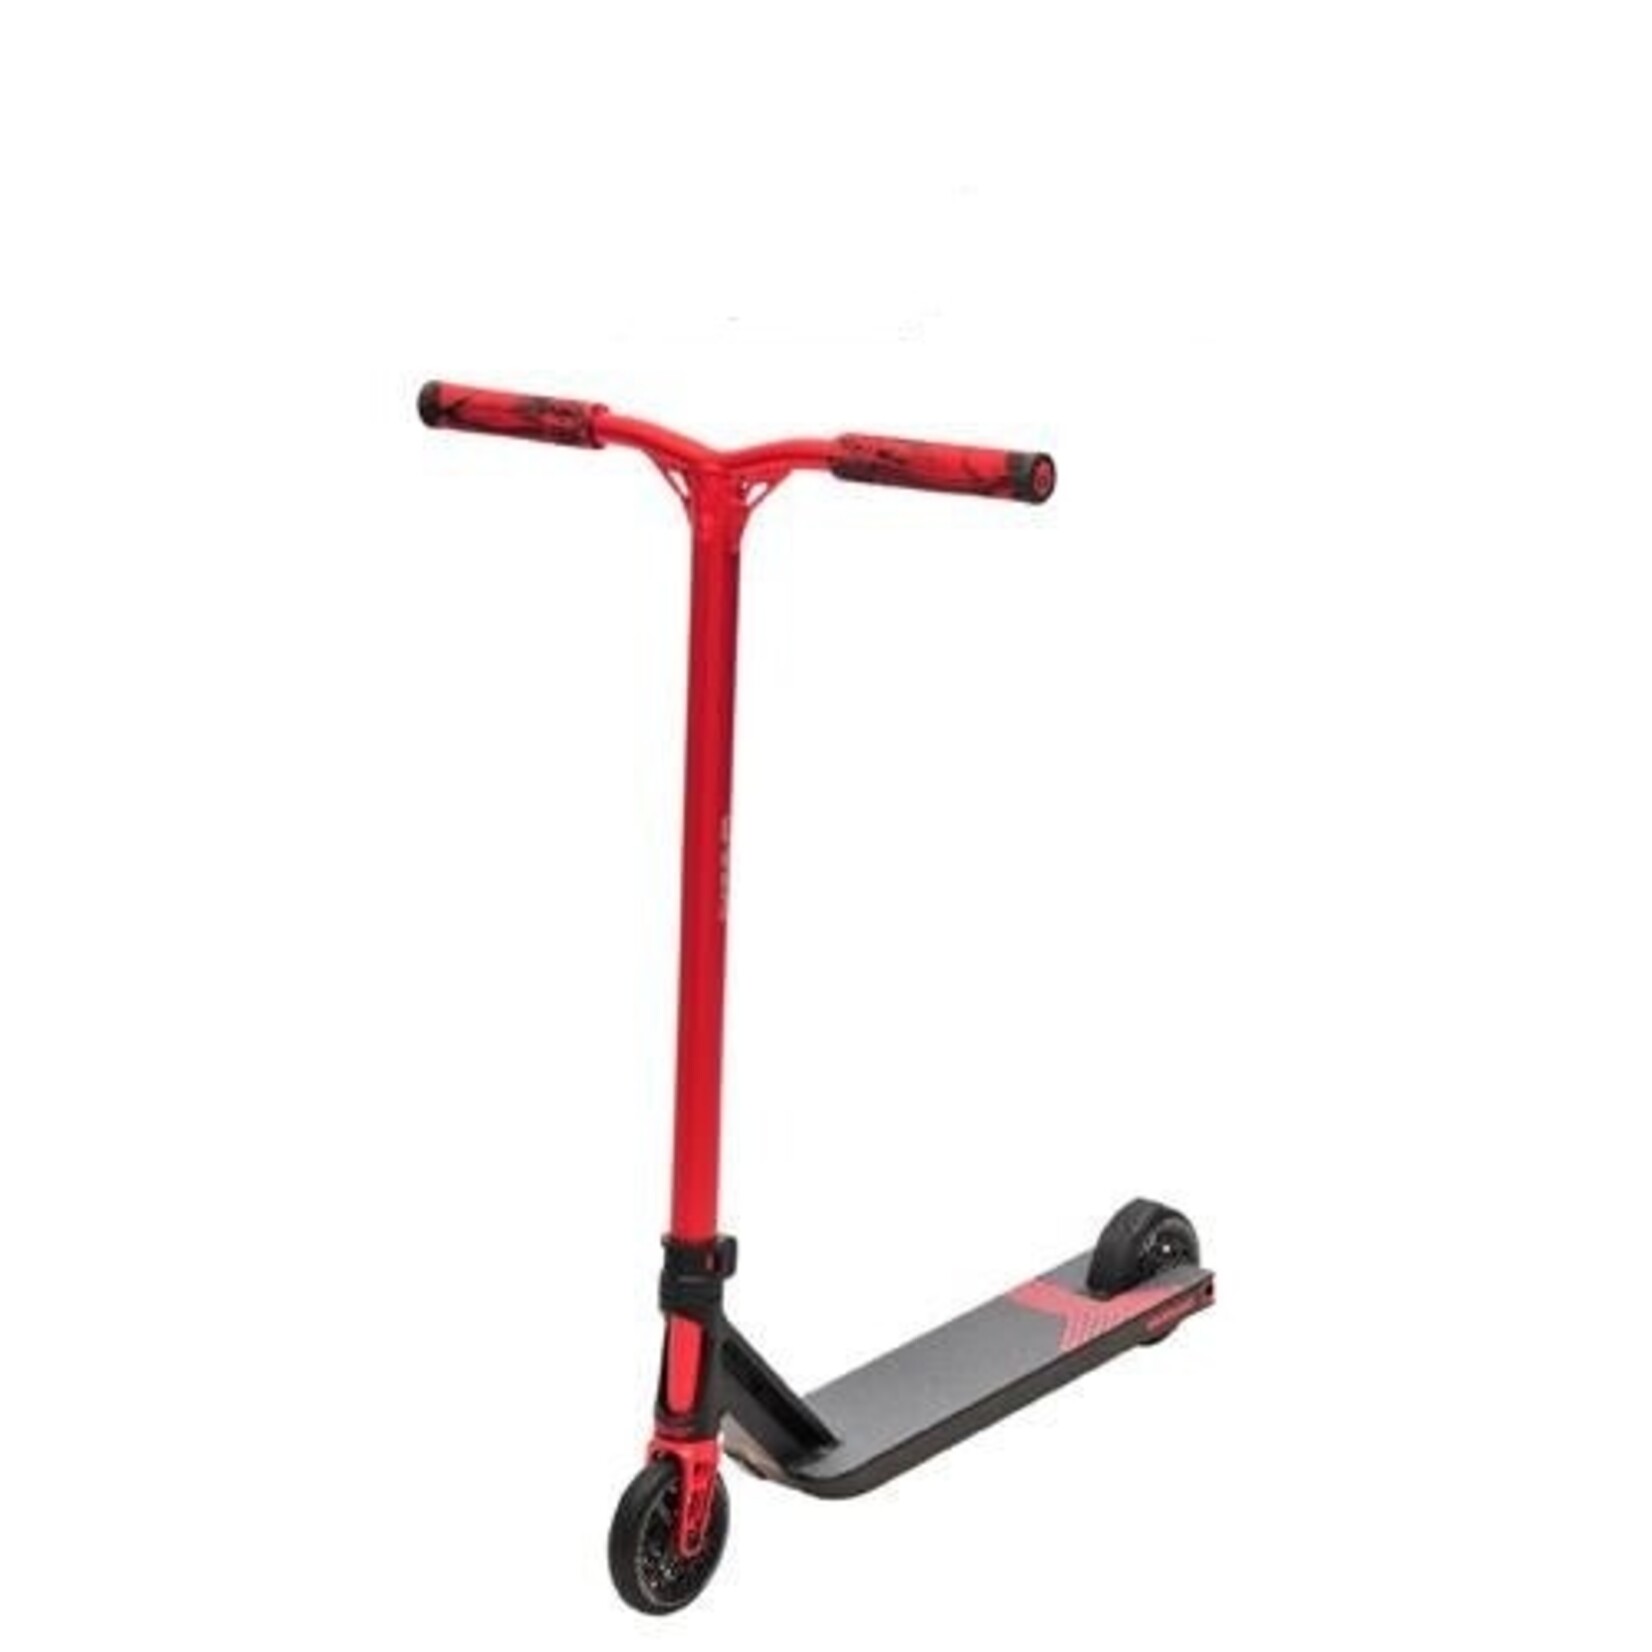 Triad Triad Scooter Delinquent - Satin Black/Red - Large - "Special"